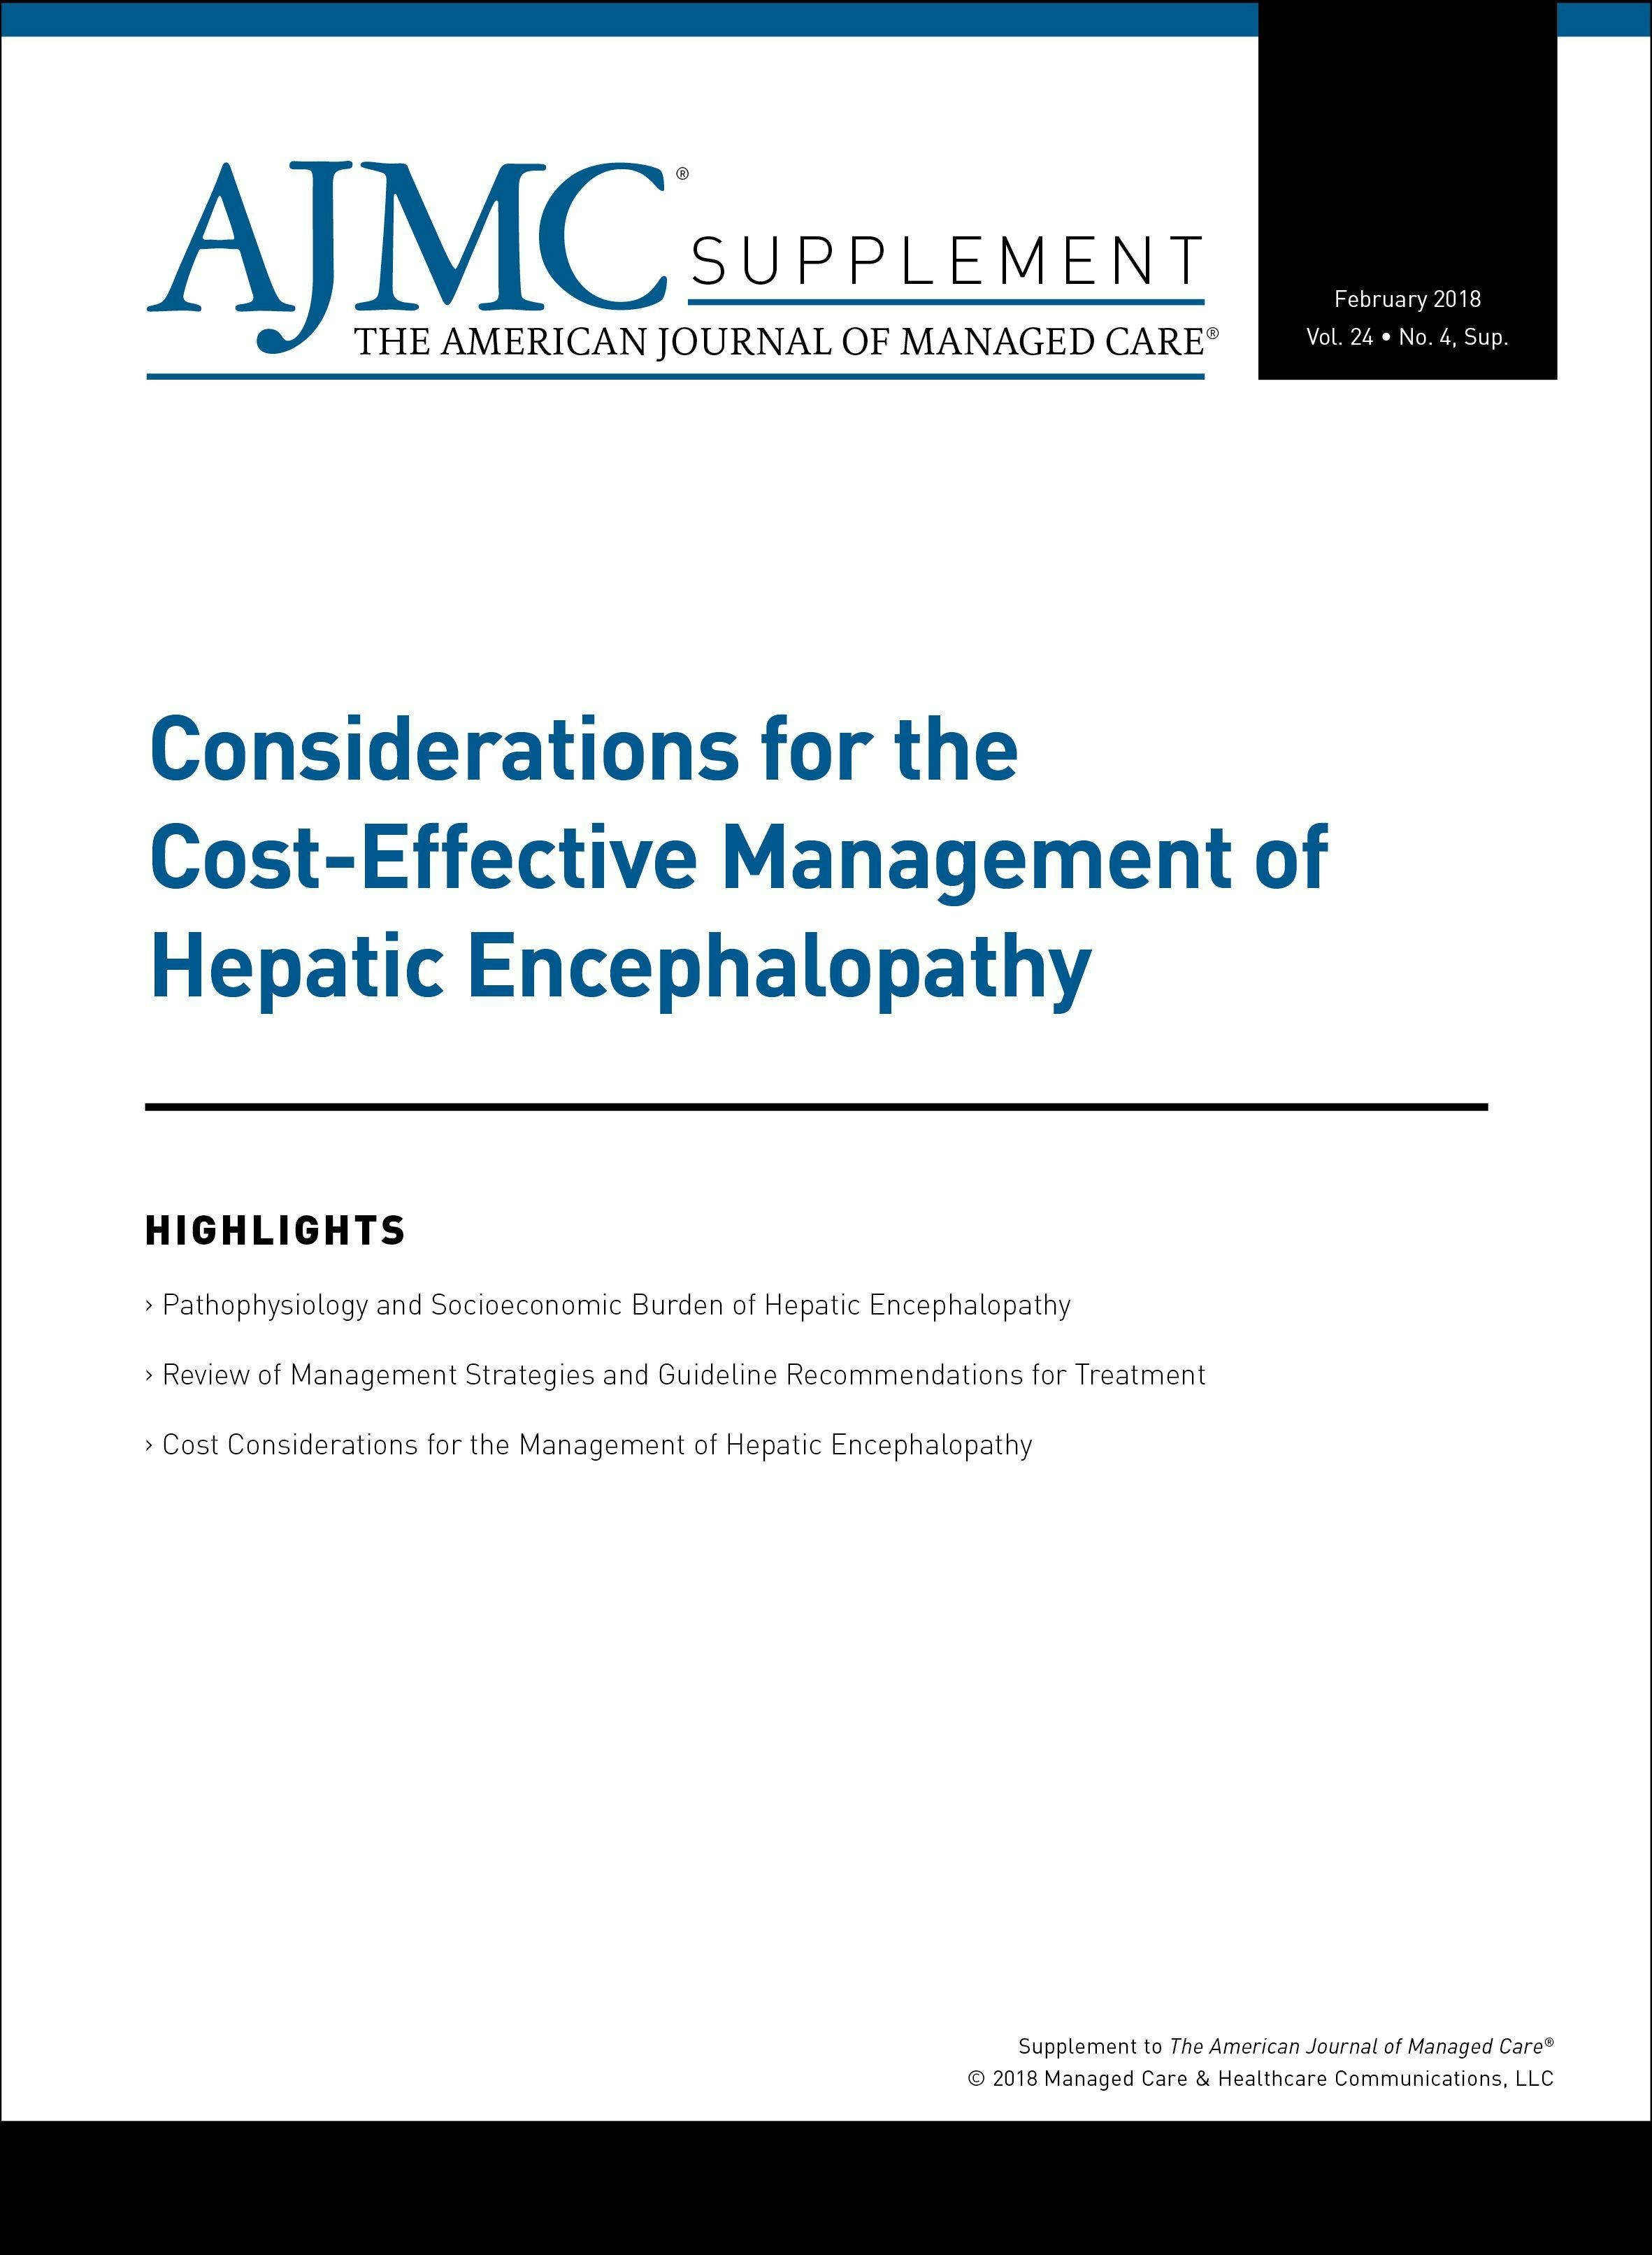 Considerations for the Cost-Effective Management of Hepatic Encephalopathy